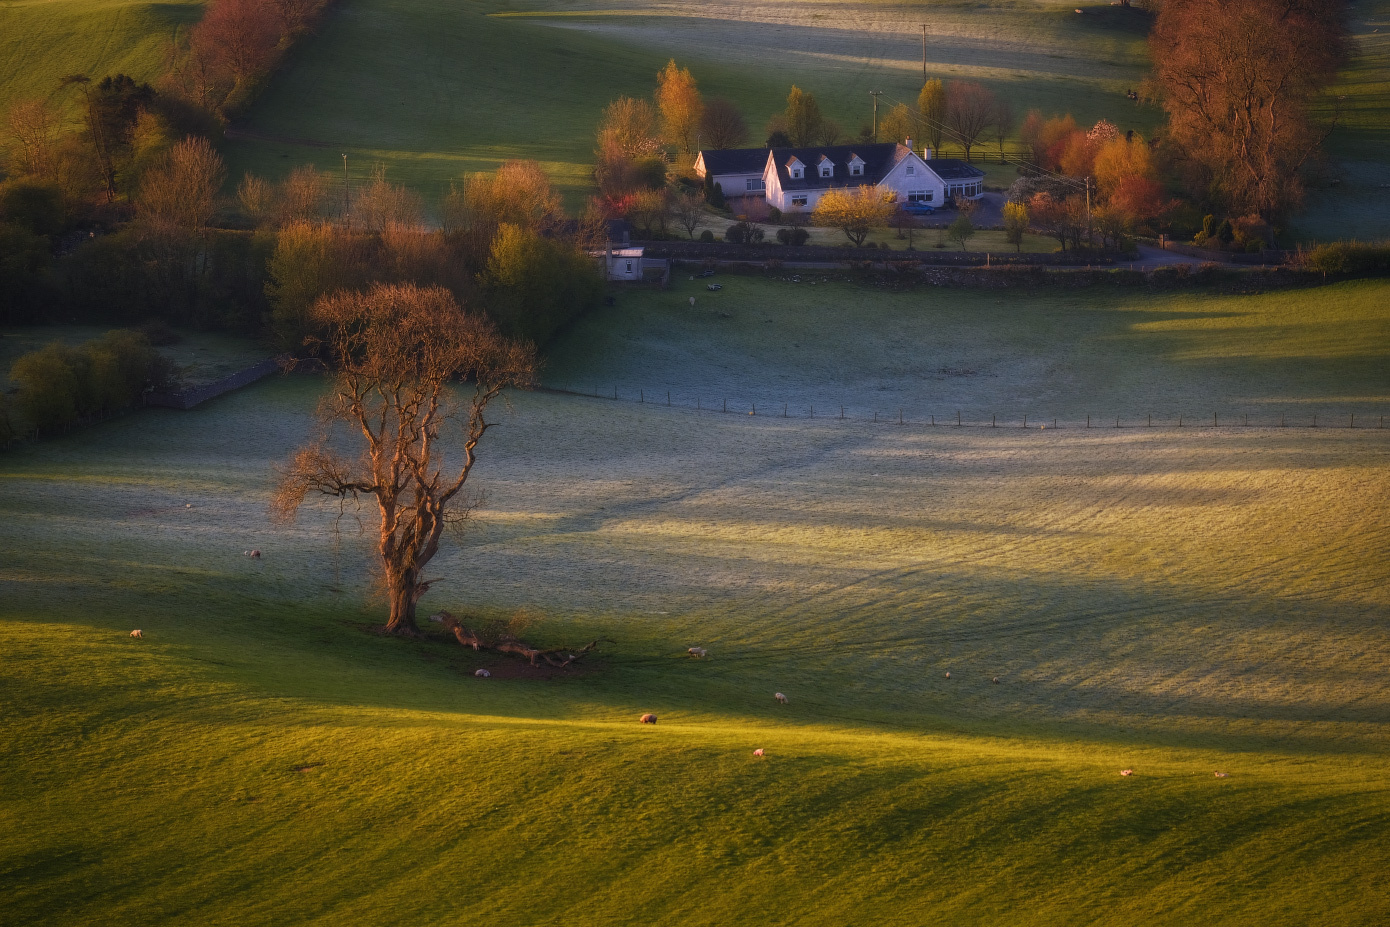 ...april rural scene... ireland nature outdoors landscape rural contryside from above morning dawn sunrise cold freeze frost meadows fields boundaries trees shades shadows cottage scenic scenery picturesque europe